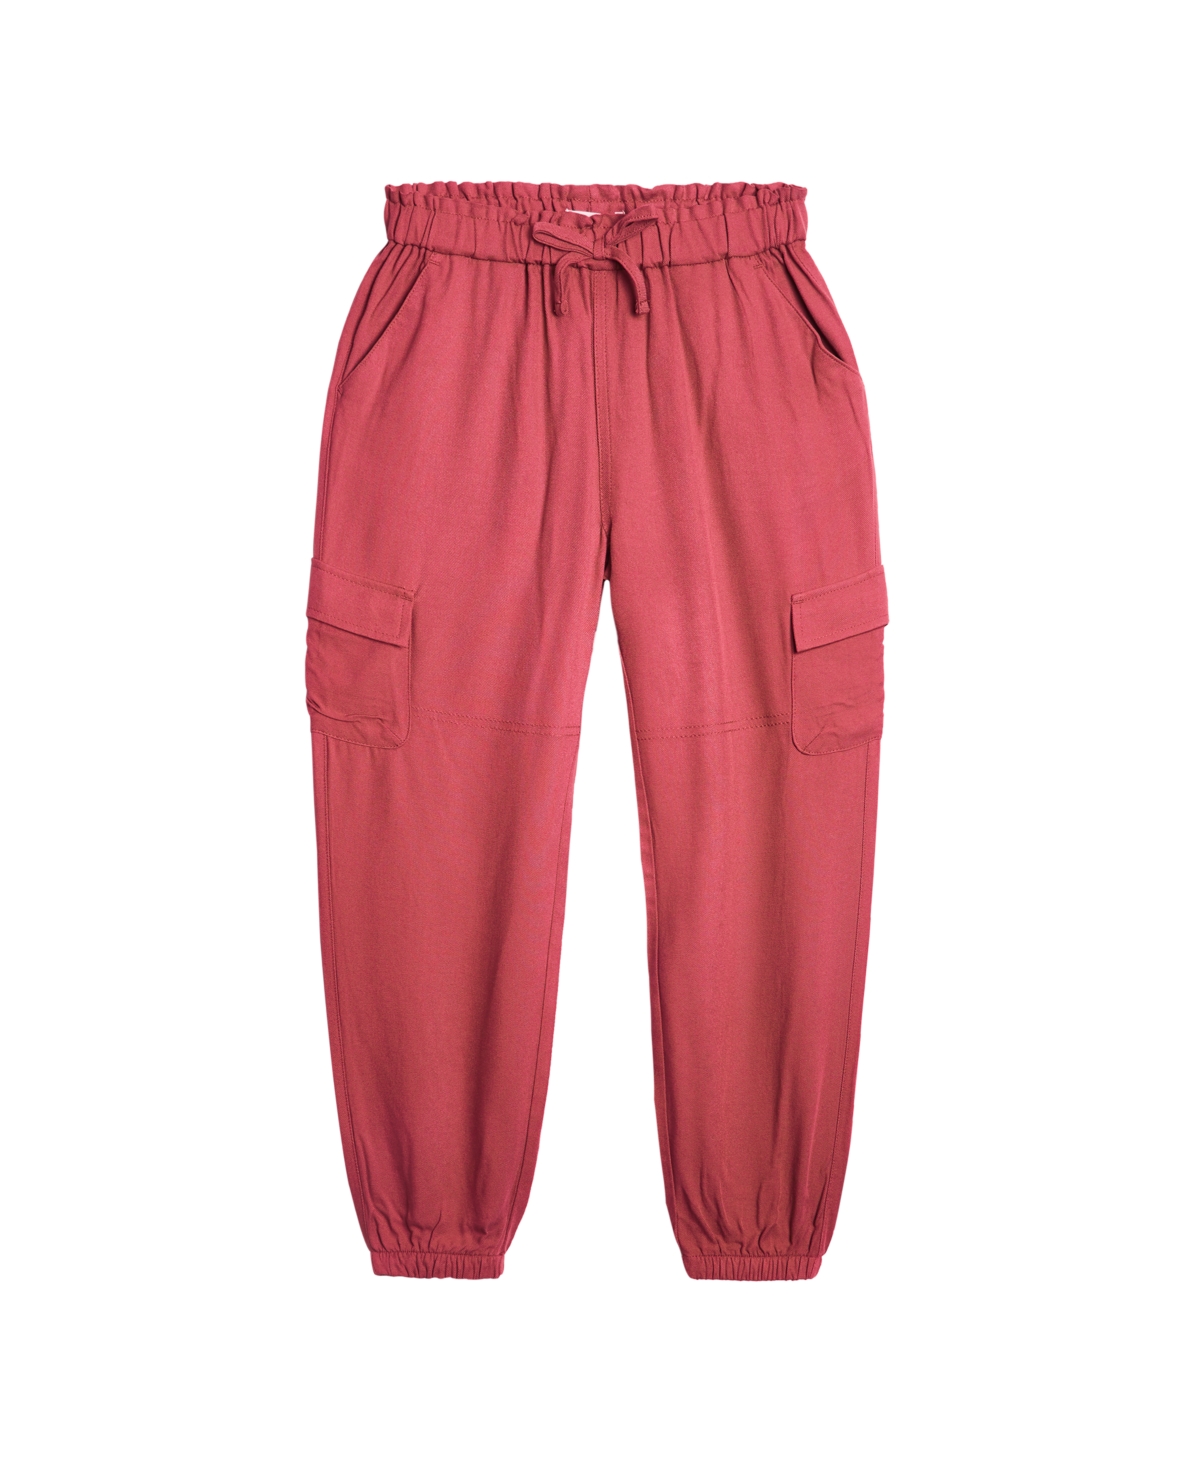 EPIC THREADS TODDLER GIRLS SOLID CARGO JOGGERS, CREATED FOR MACY'S